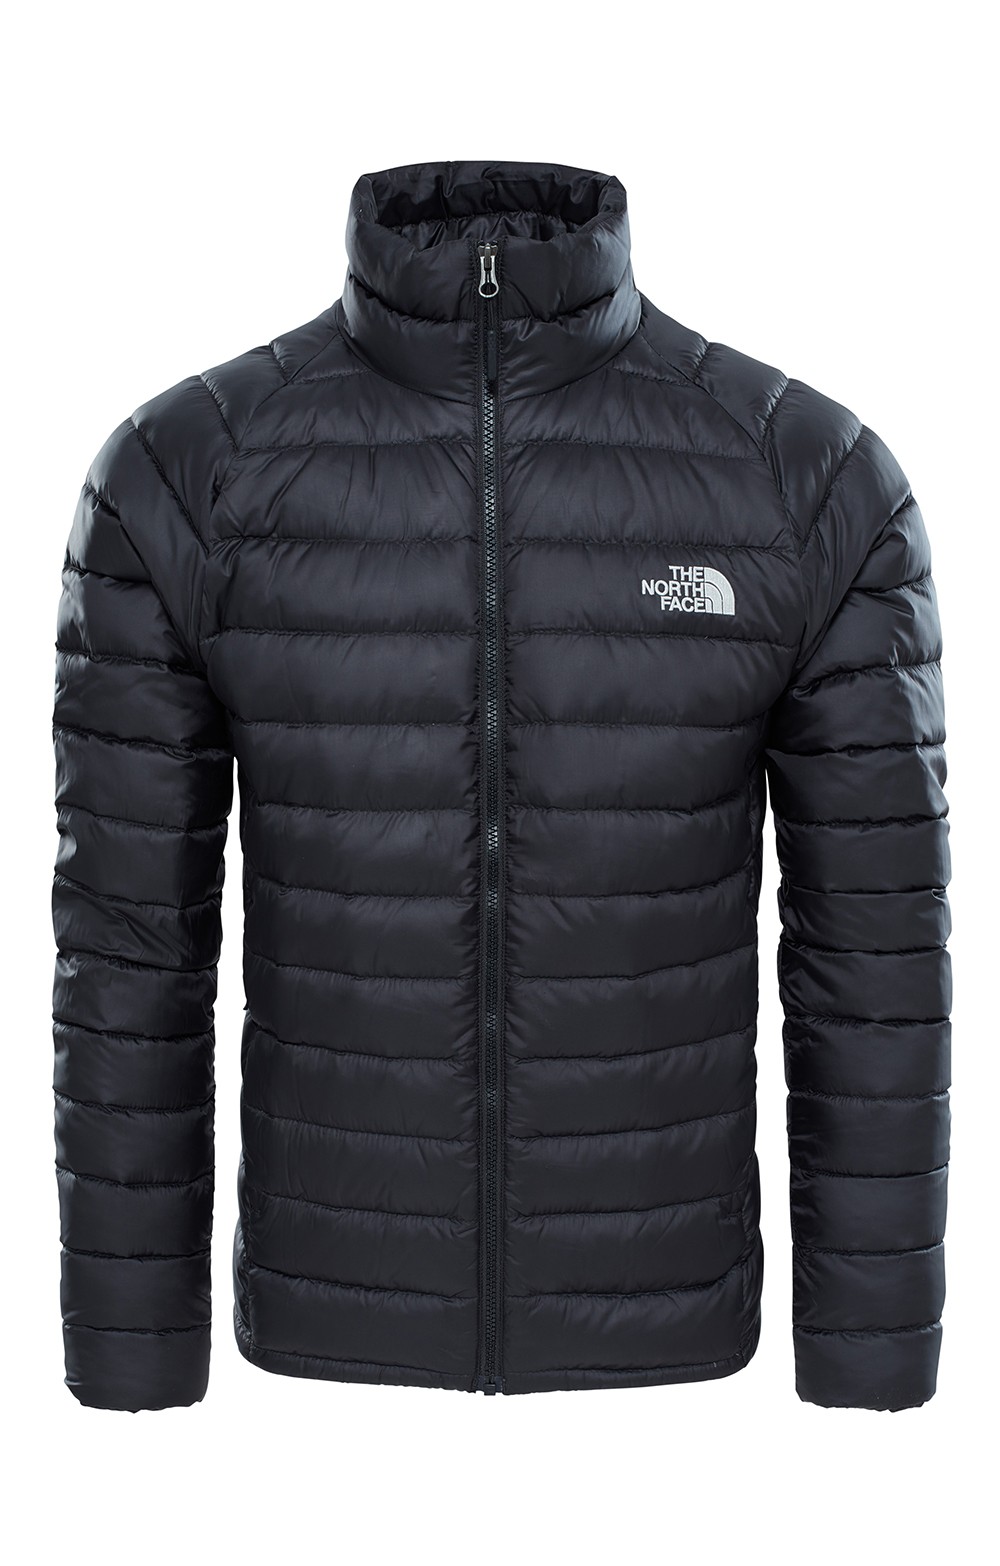 the north face 700 down jacket